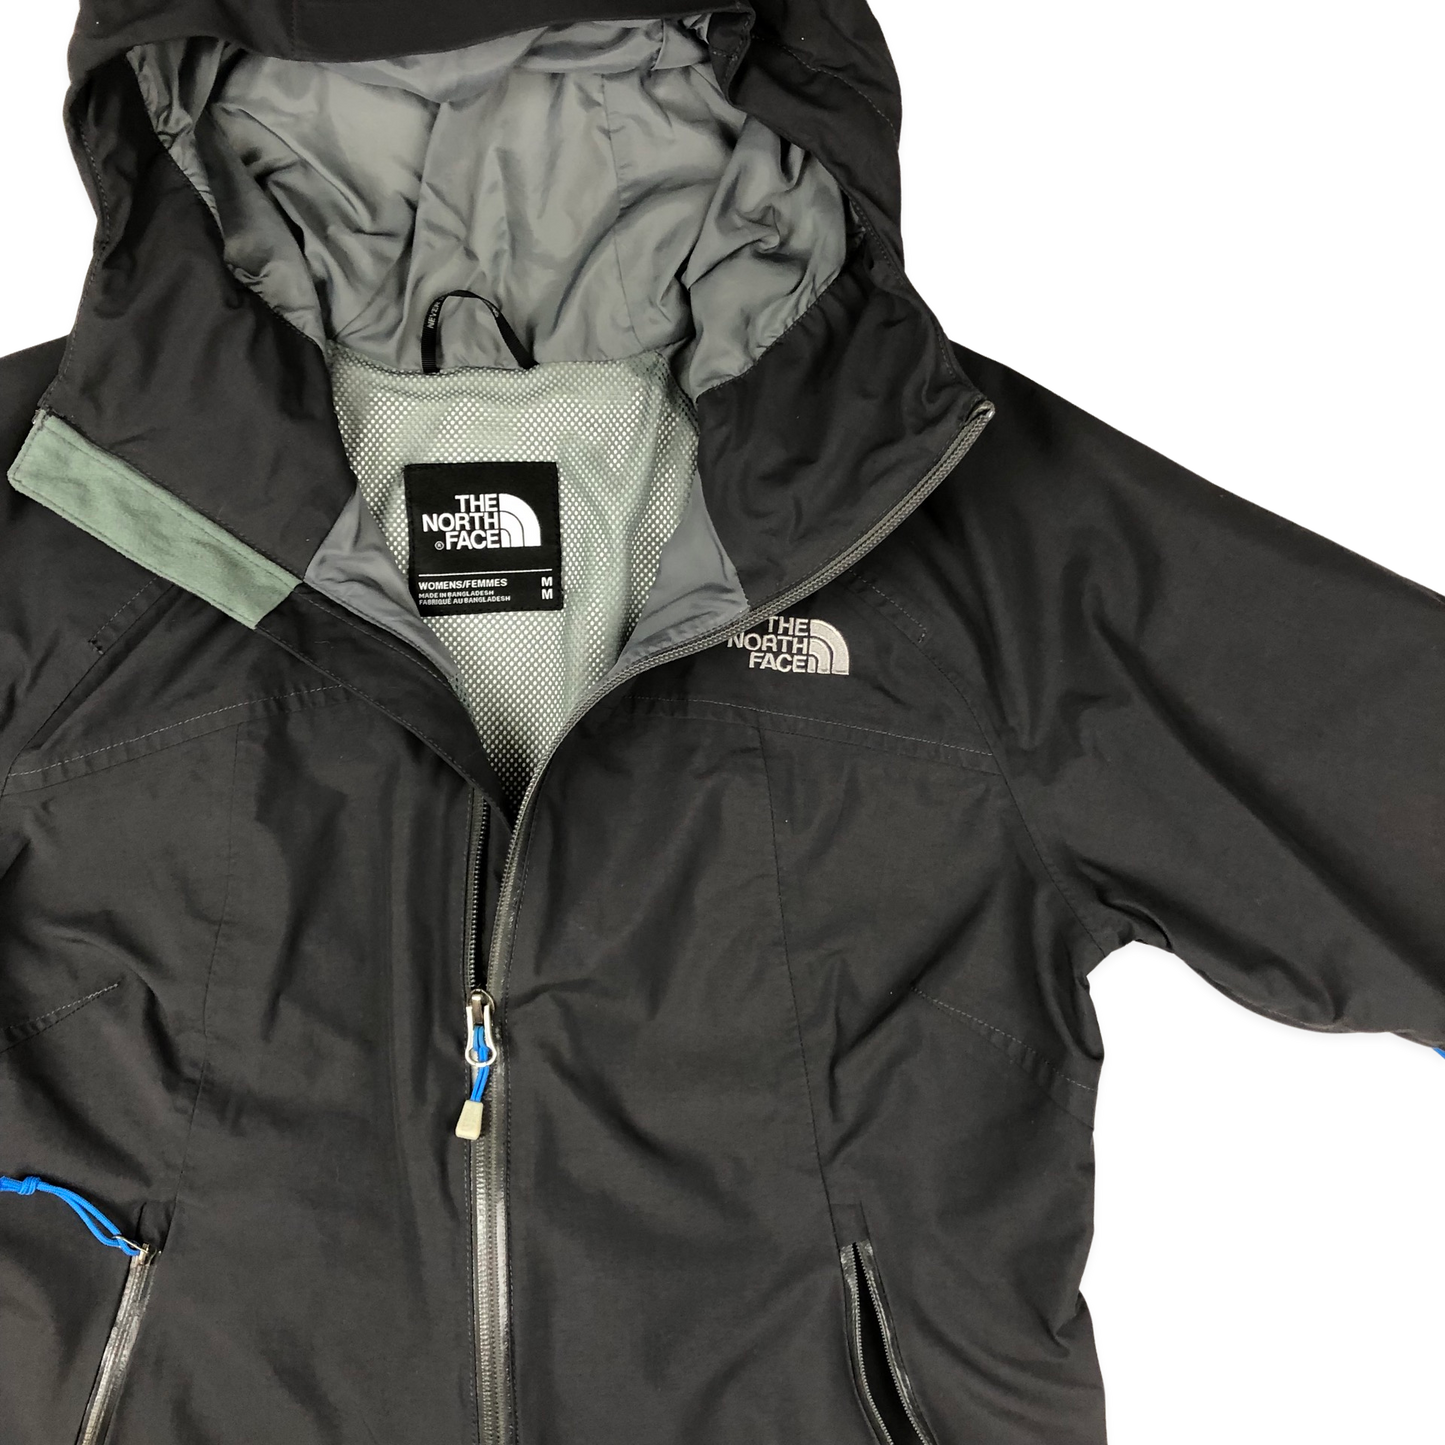 Vintage The North Face Charcoal Grey HyVent Jacket S